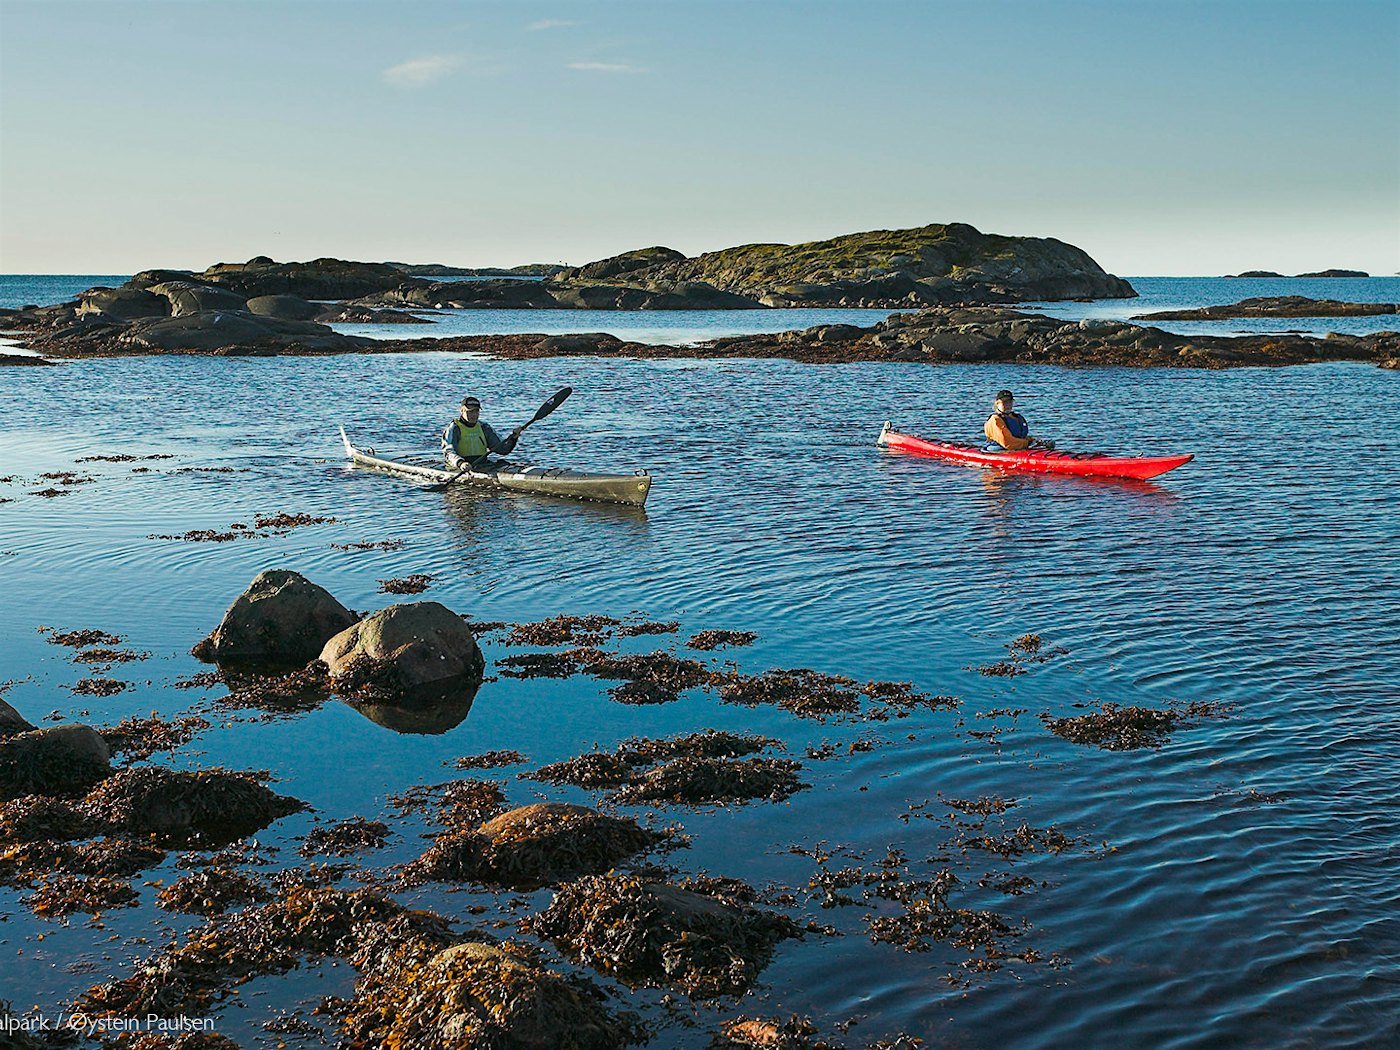 Two kayakers on the sea, with rocky cliffs around. Photo